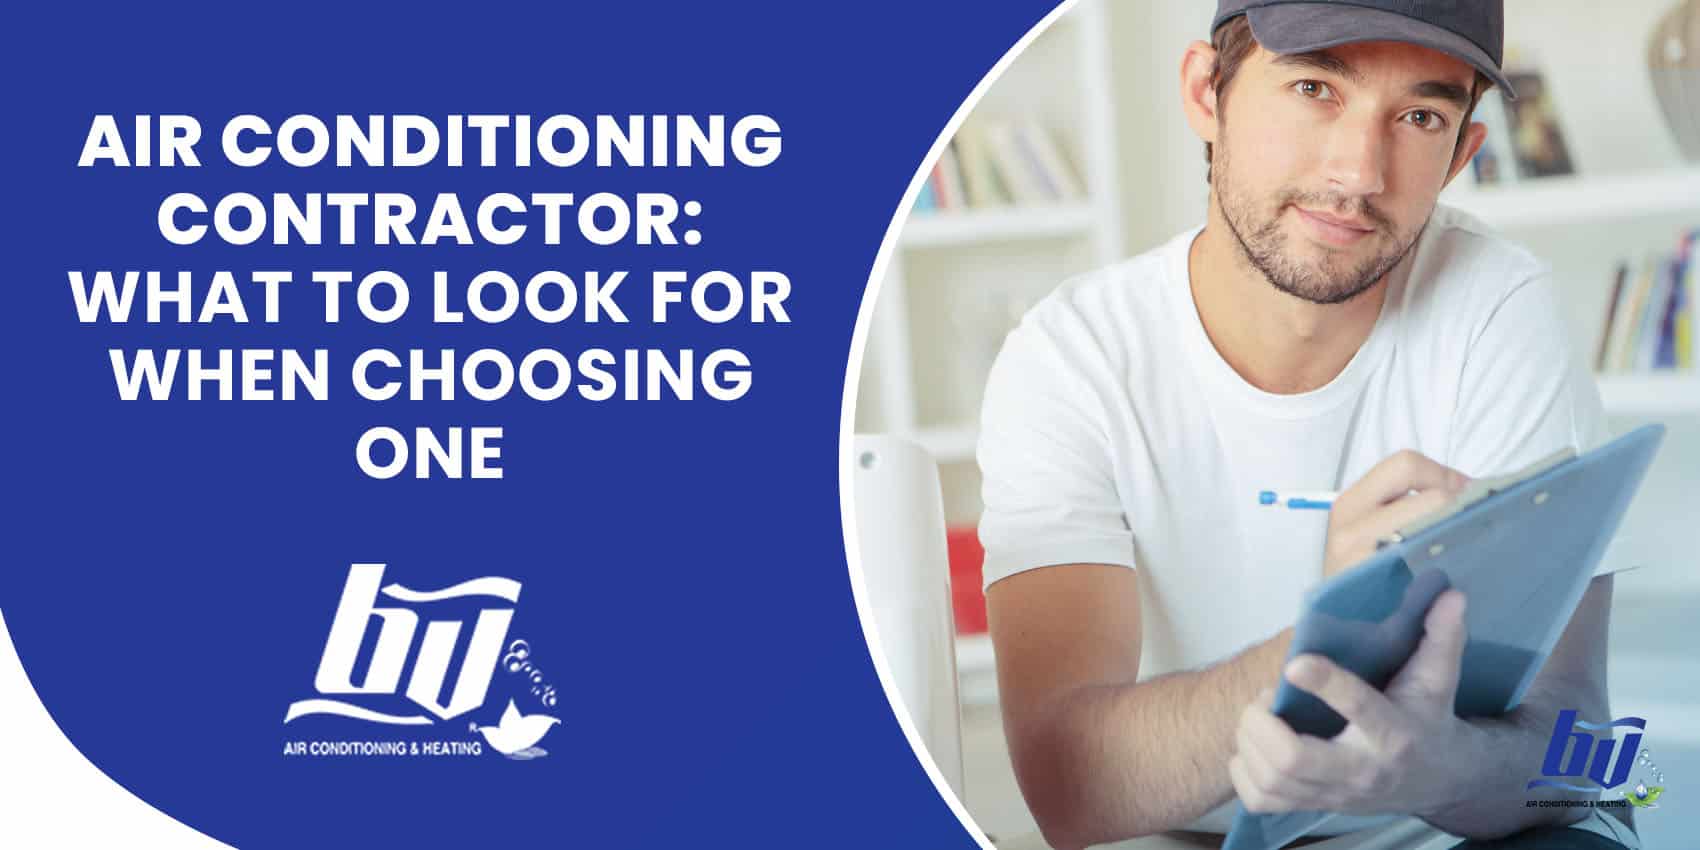 Air Conditioning Contractor: What to Look for When Choosing One